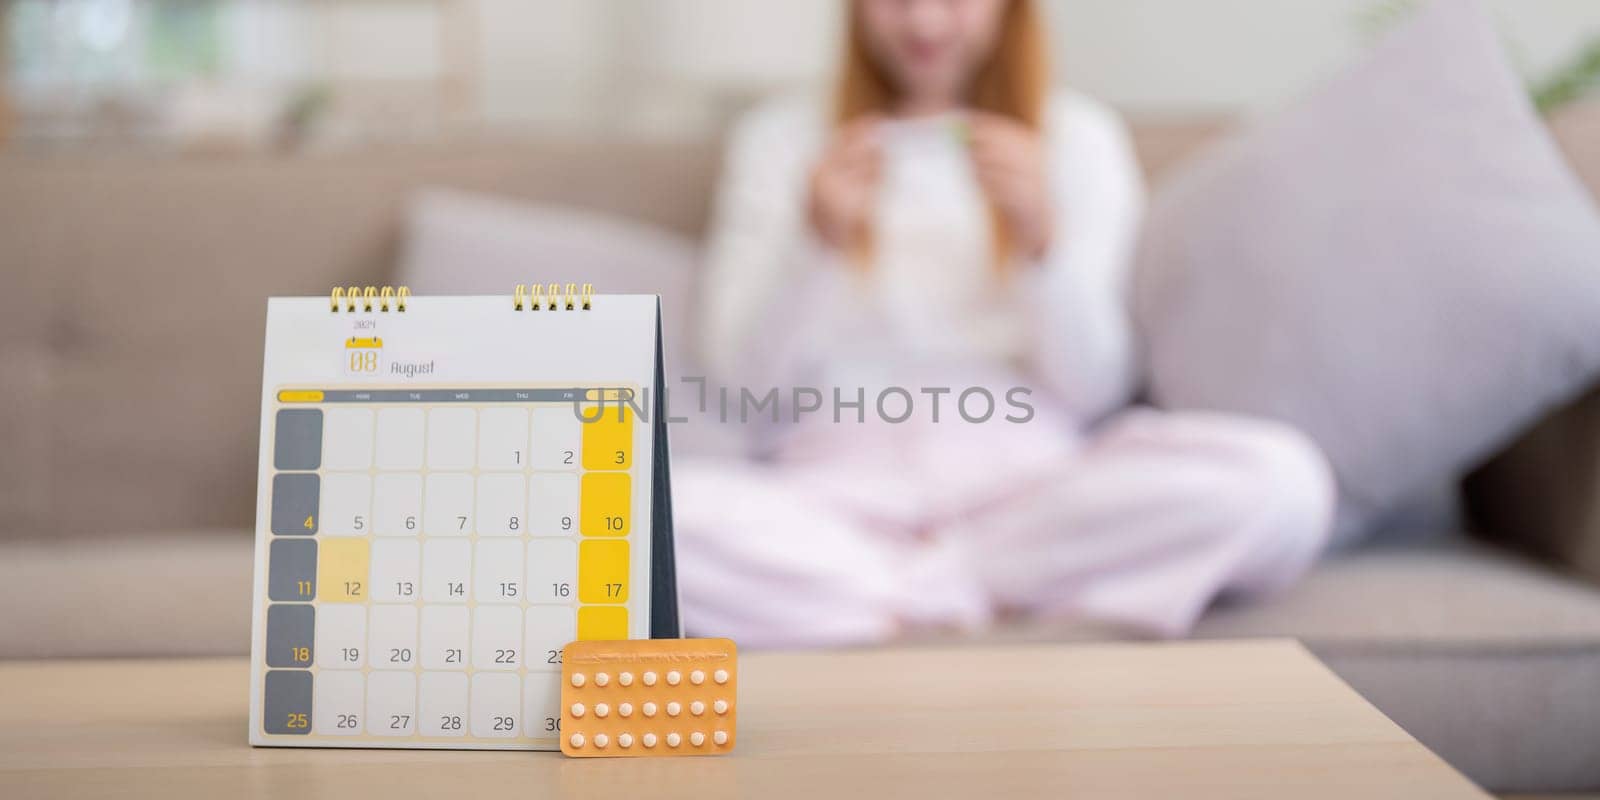 Birth control pills with calendar on table at home. Concept of contraception, family planning, and women's healthcare by nateemee